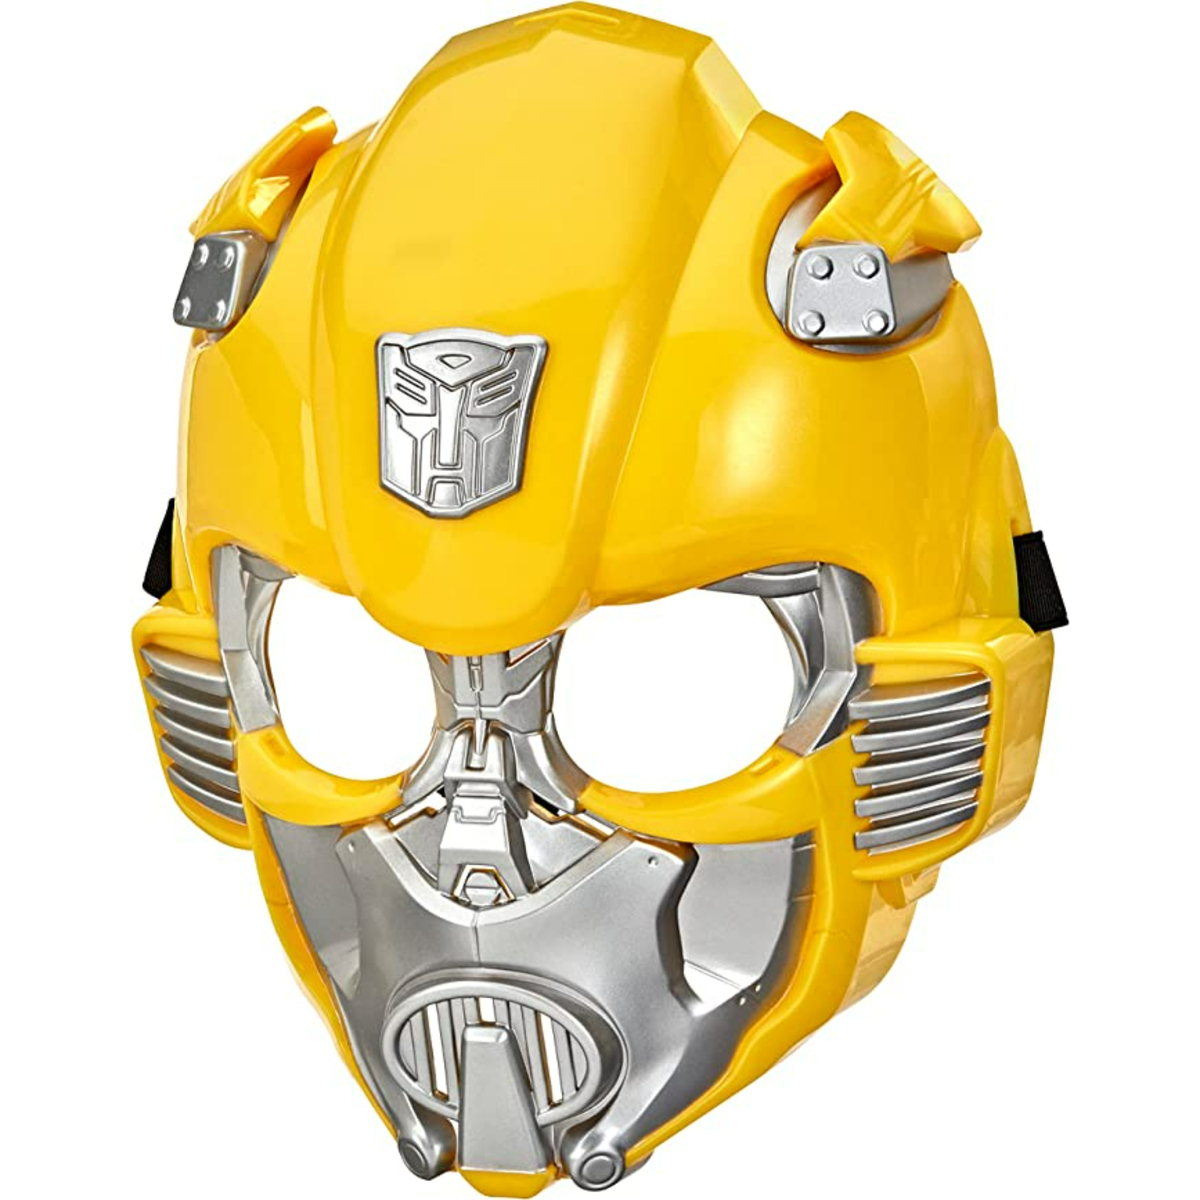 Transformers MV7 Mask, Bumblebee, Assorted 1 Pc, F4644